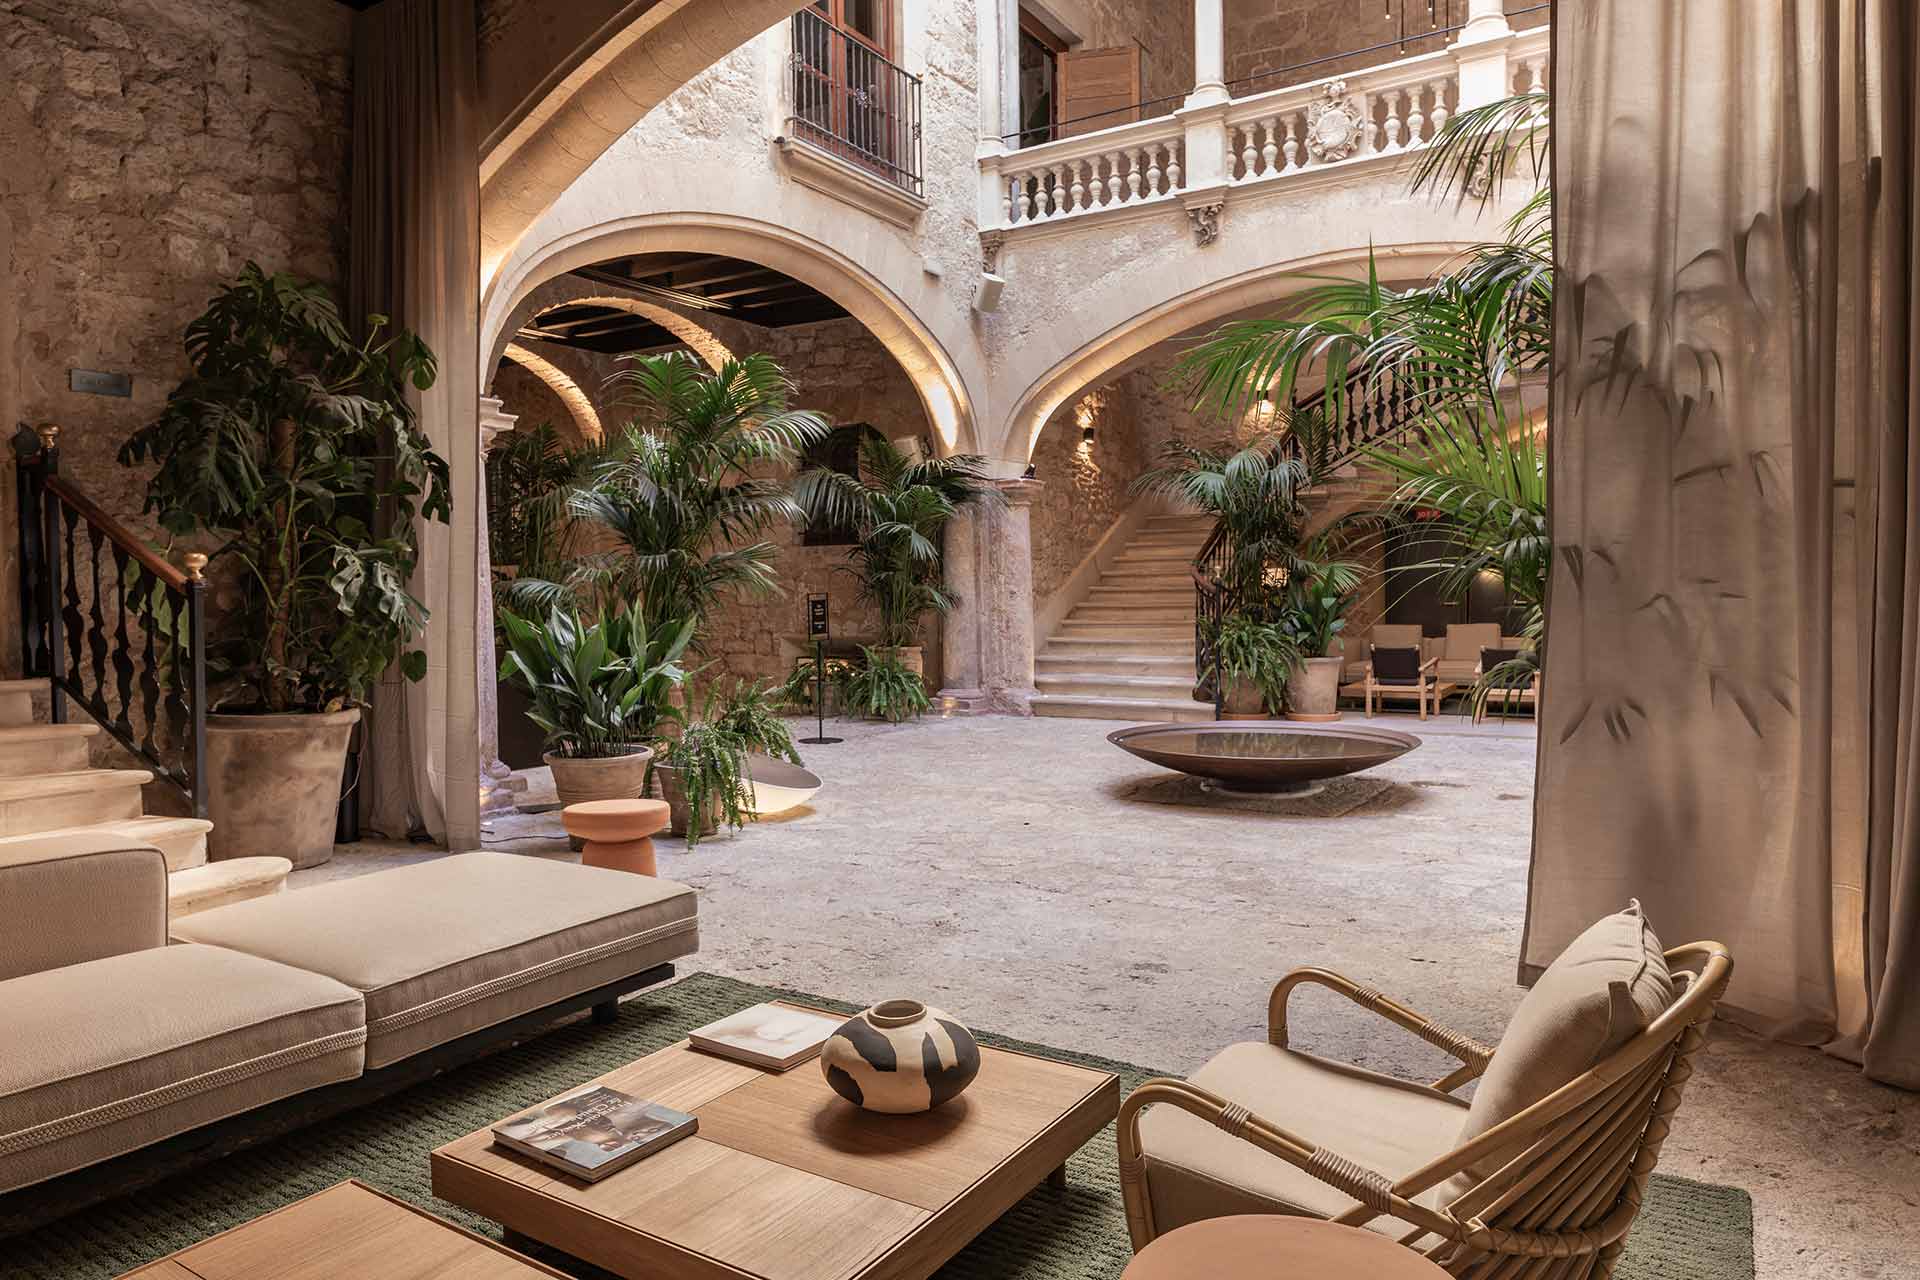 Lobby at the Nobis Hotel Palma, defined by its greenery